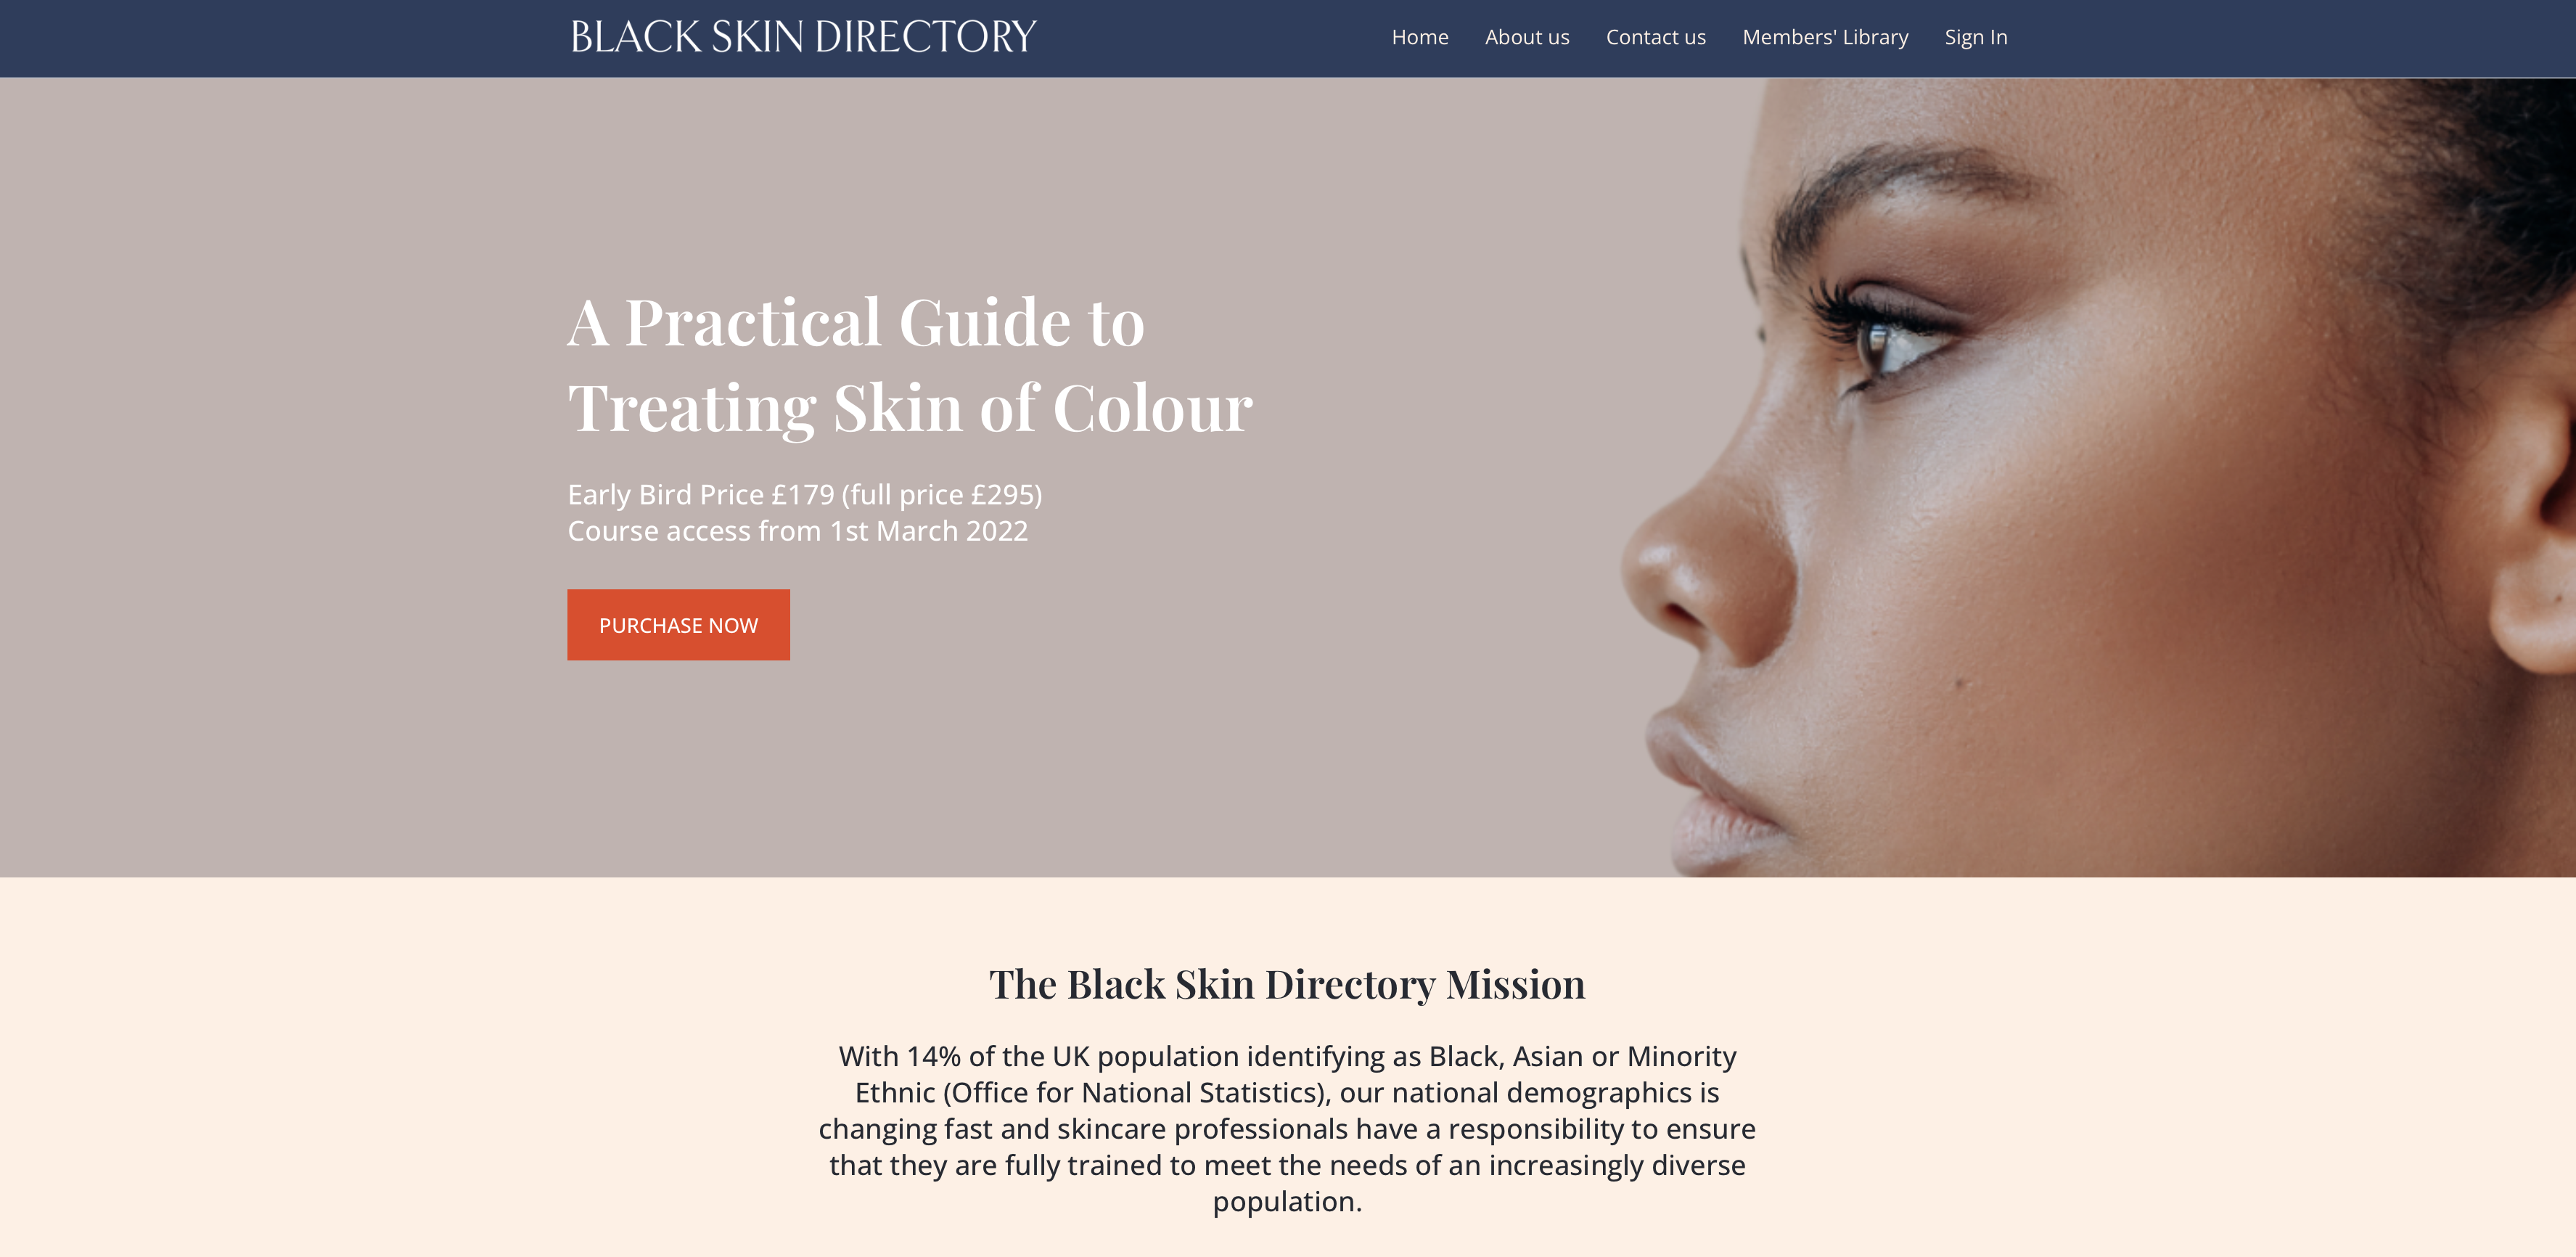 BLACK SKIN DIRECTORY COURSE: BUILDING SKIN OF COLOUR CONFIDENCE